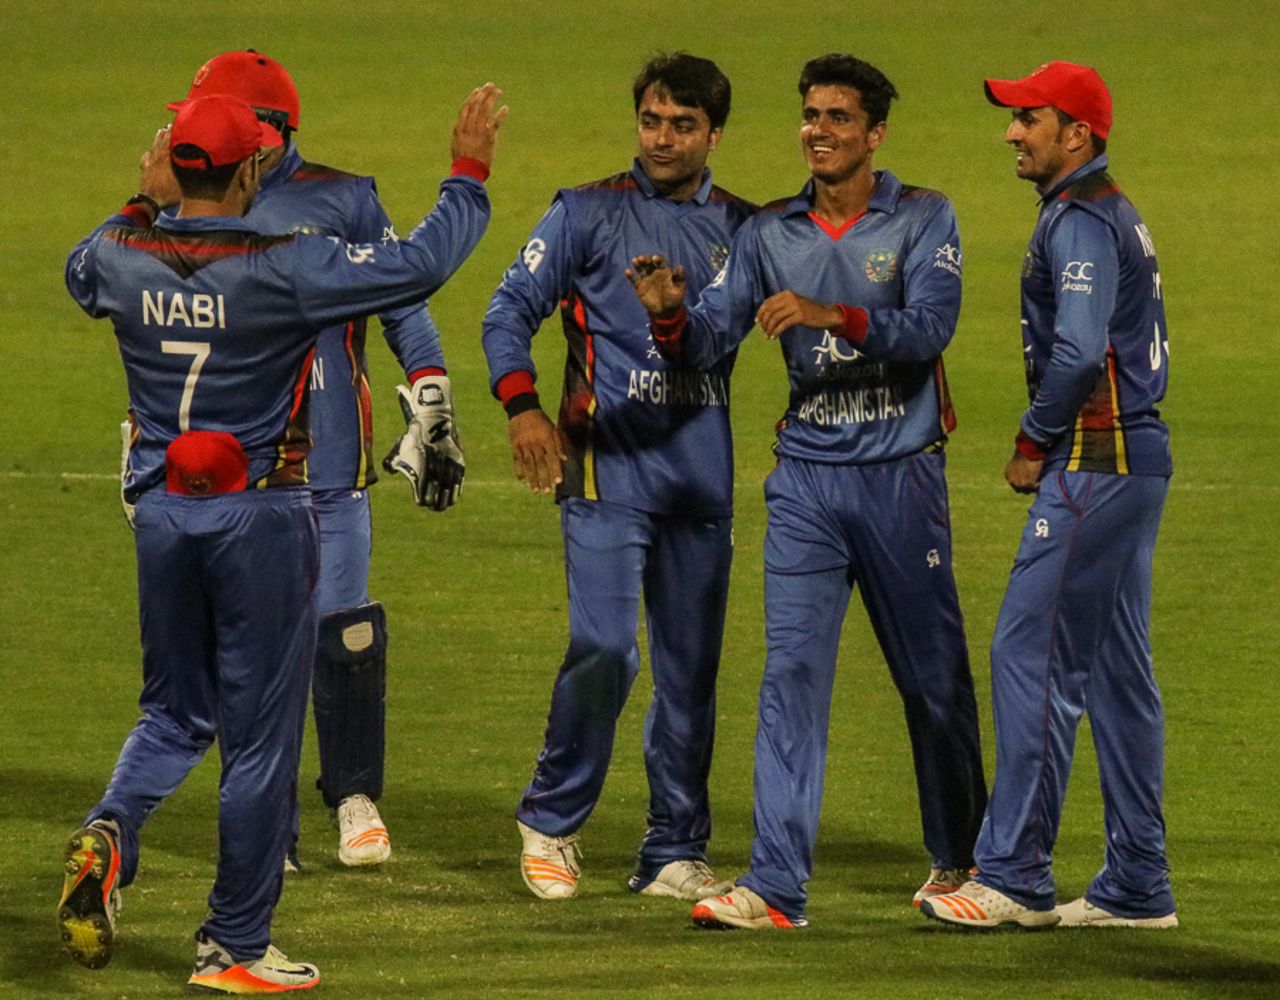 Afghanistan gets into celebration mode after Mujeeb Zadran bowls Gary Wilson for his third wicket on ODI debut, Afghanistan v Ireland, 1st ODI, Sharjah, December 5, 2017